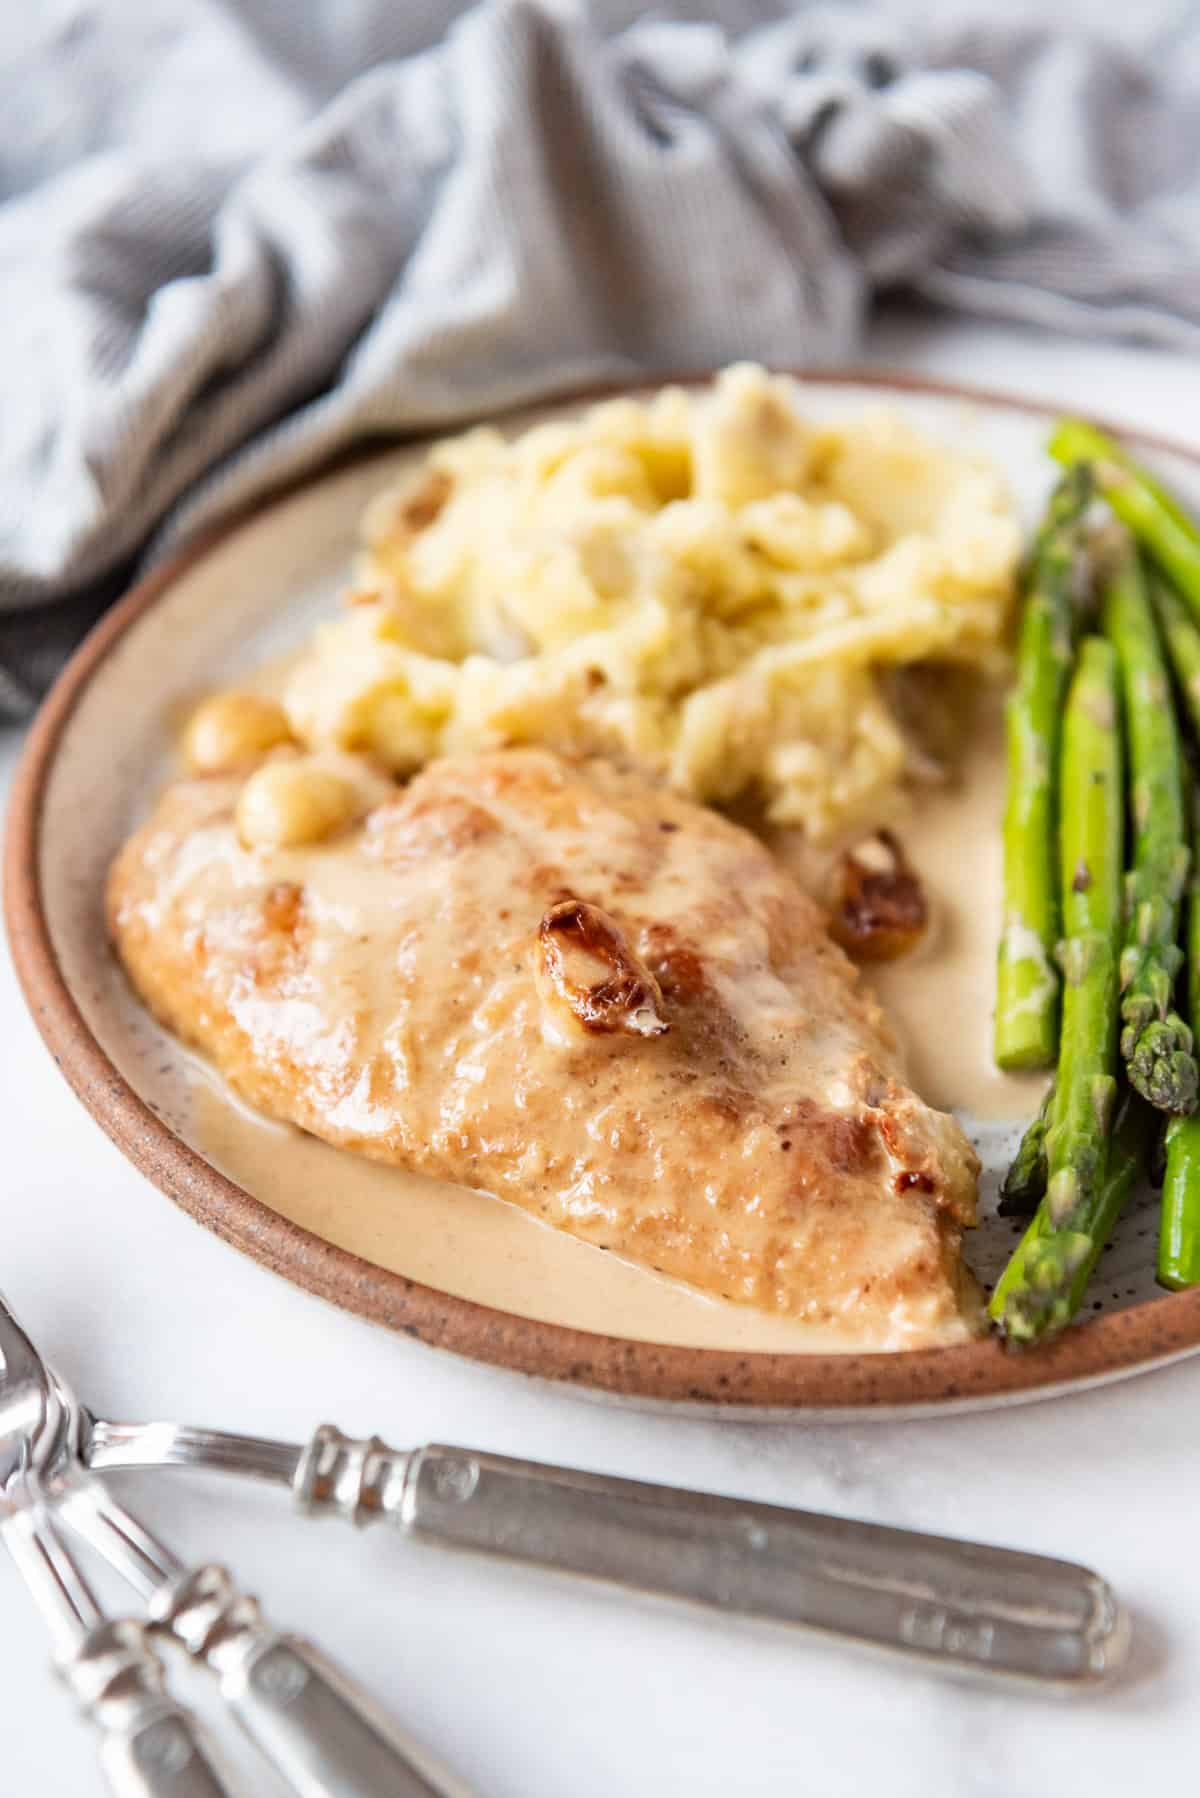 A piece of creamy garlic chicken on a plate with mashed potatoes and asparagus in front of a linen napkin.